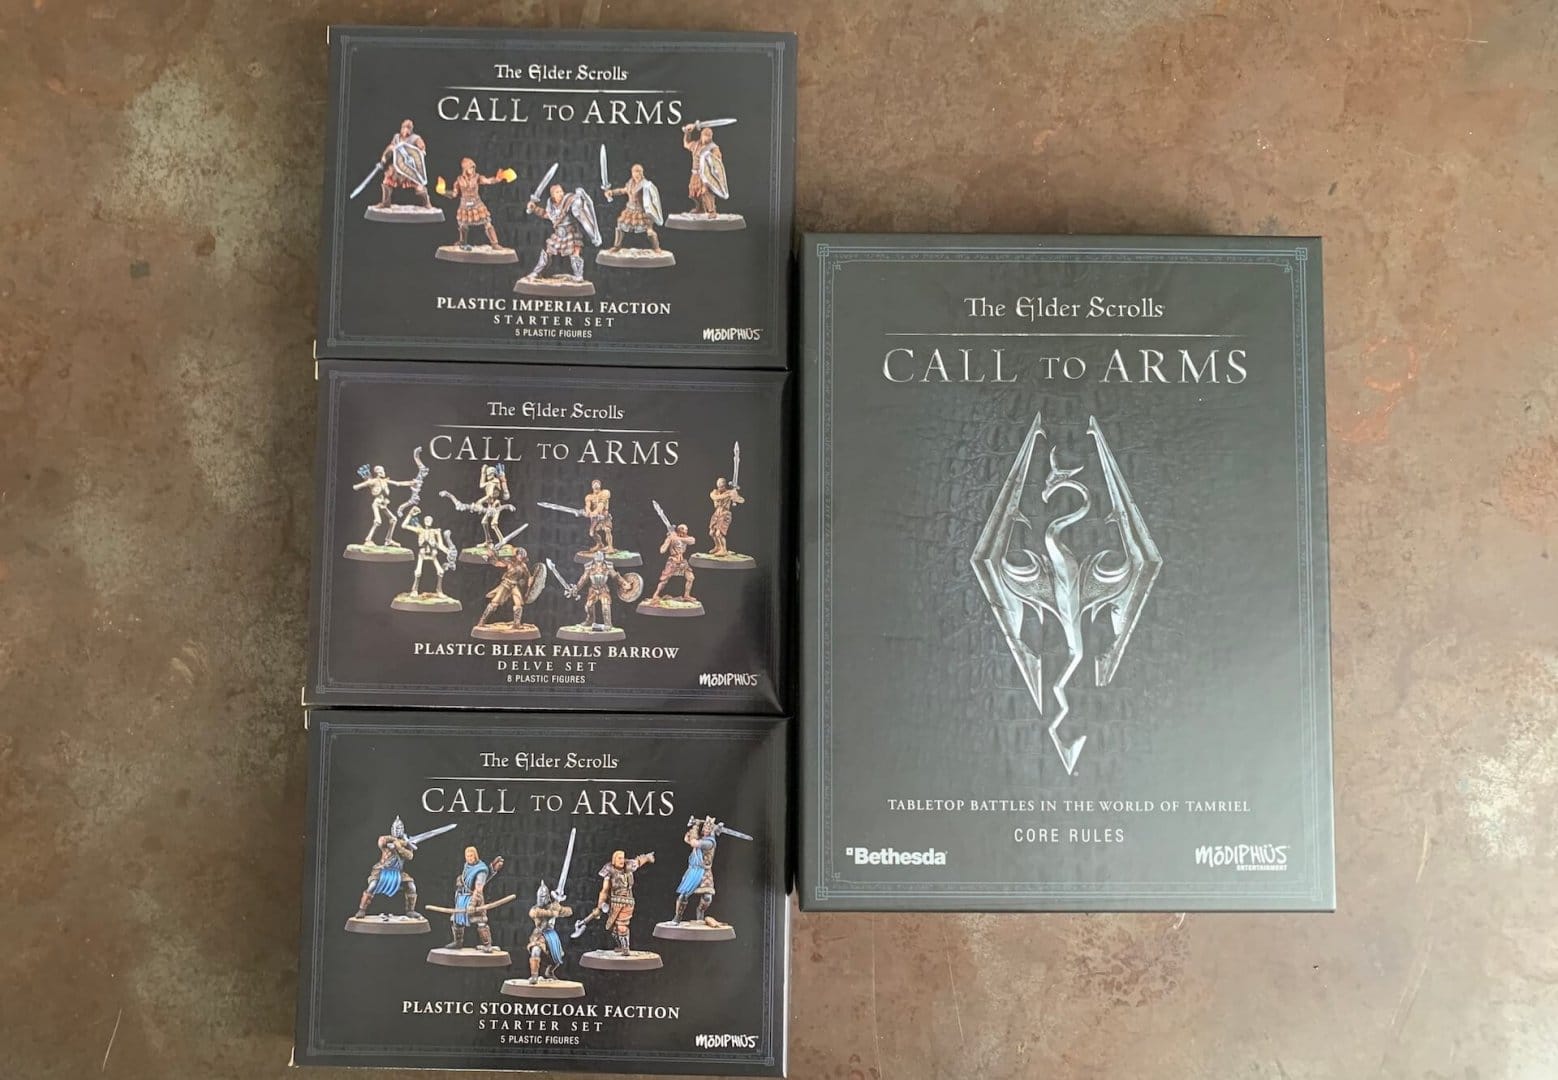 The boxes included in the first wave of The Elder Scrolls: Call To Arms